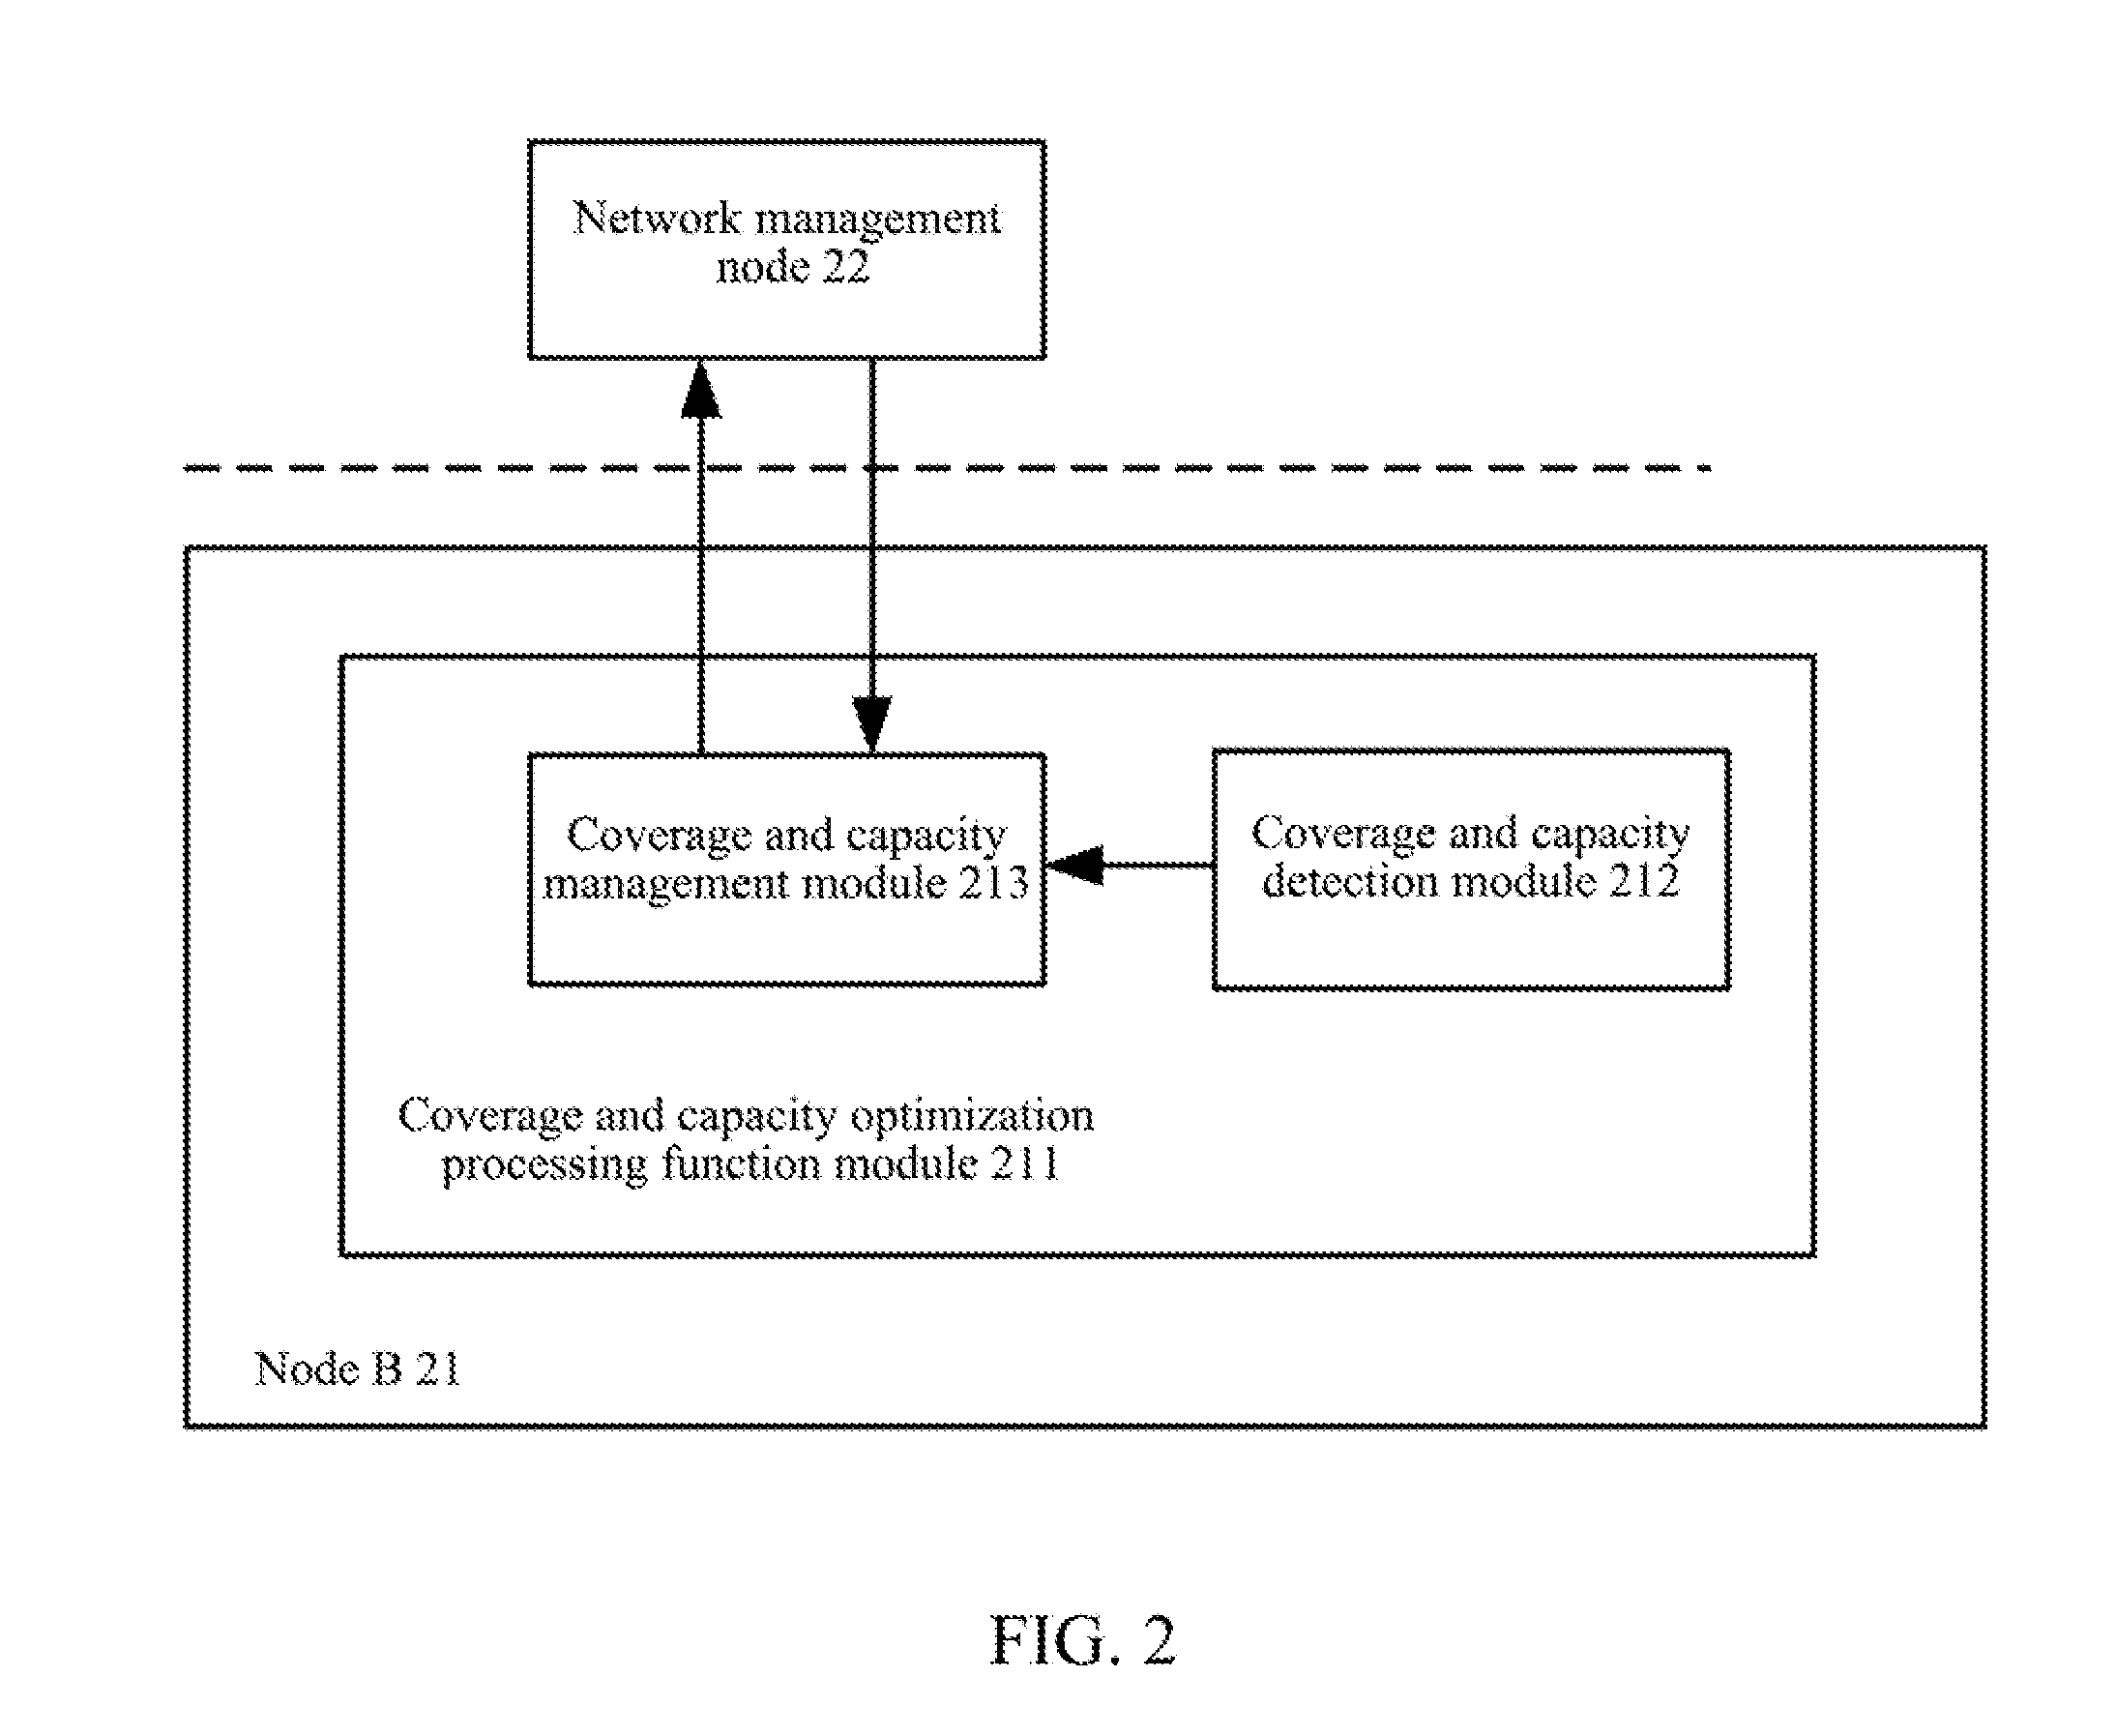 Method and System for Optimizing Network Coverage and Capacity